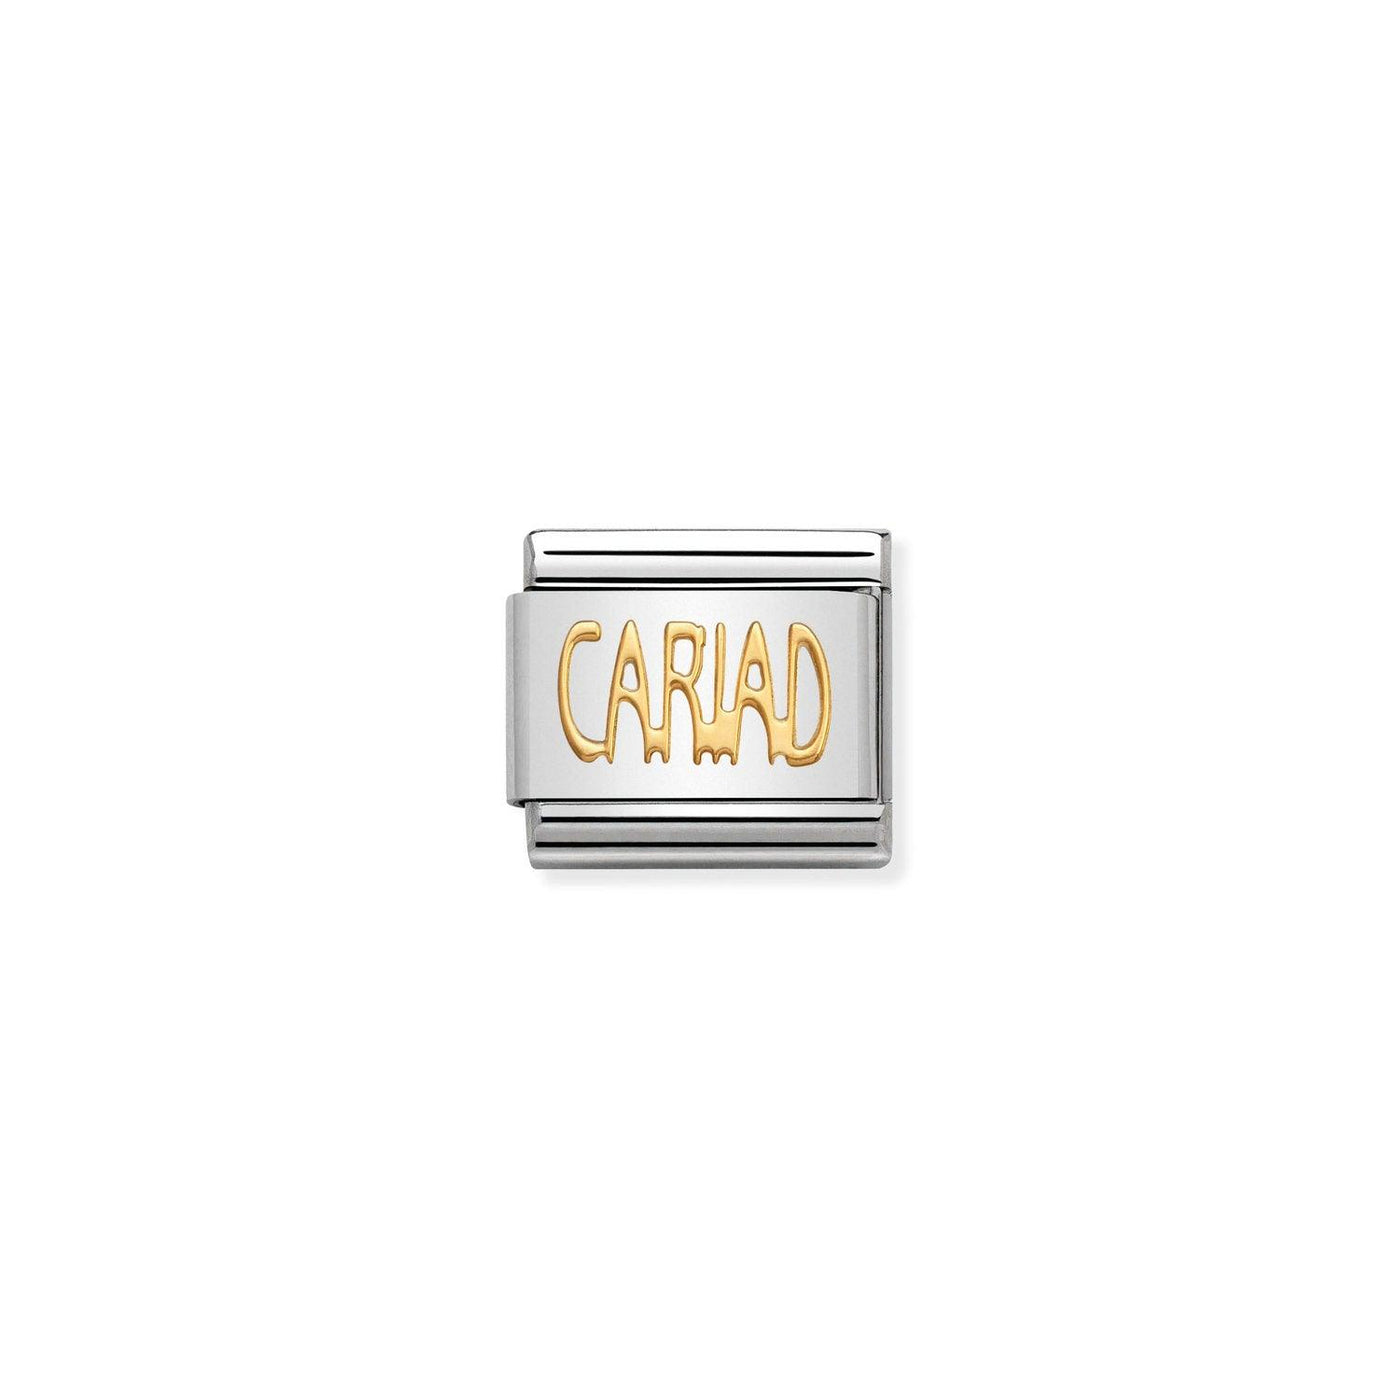 Nomination Cariad (Darling/Beloved) Charm - Rococo Jewellery